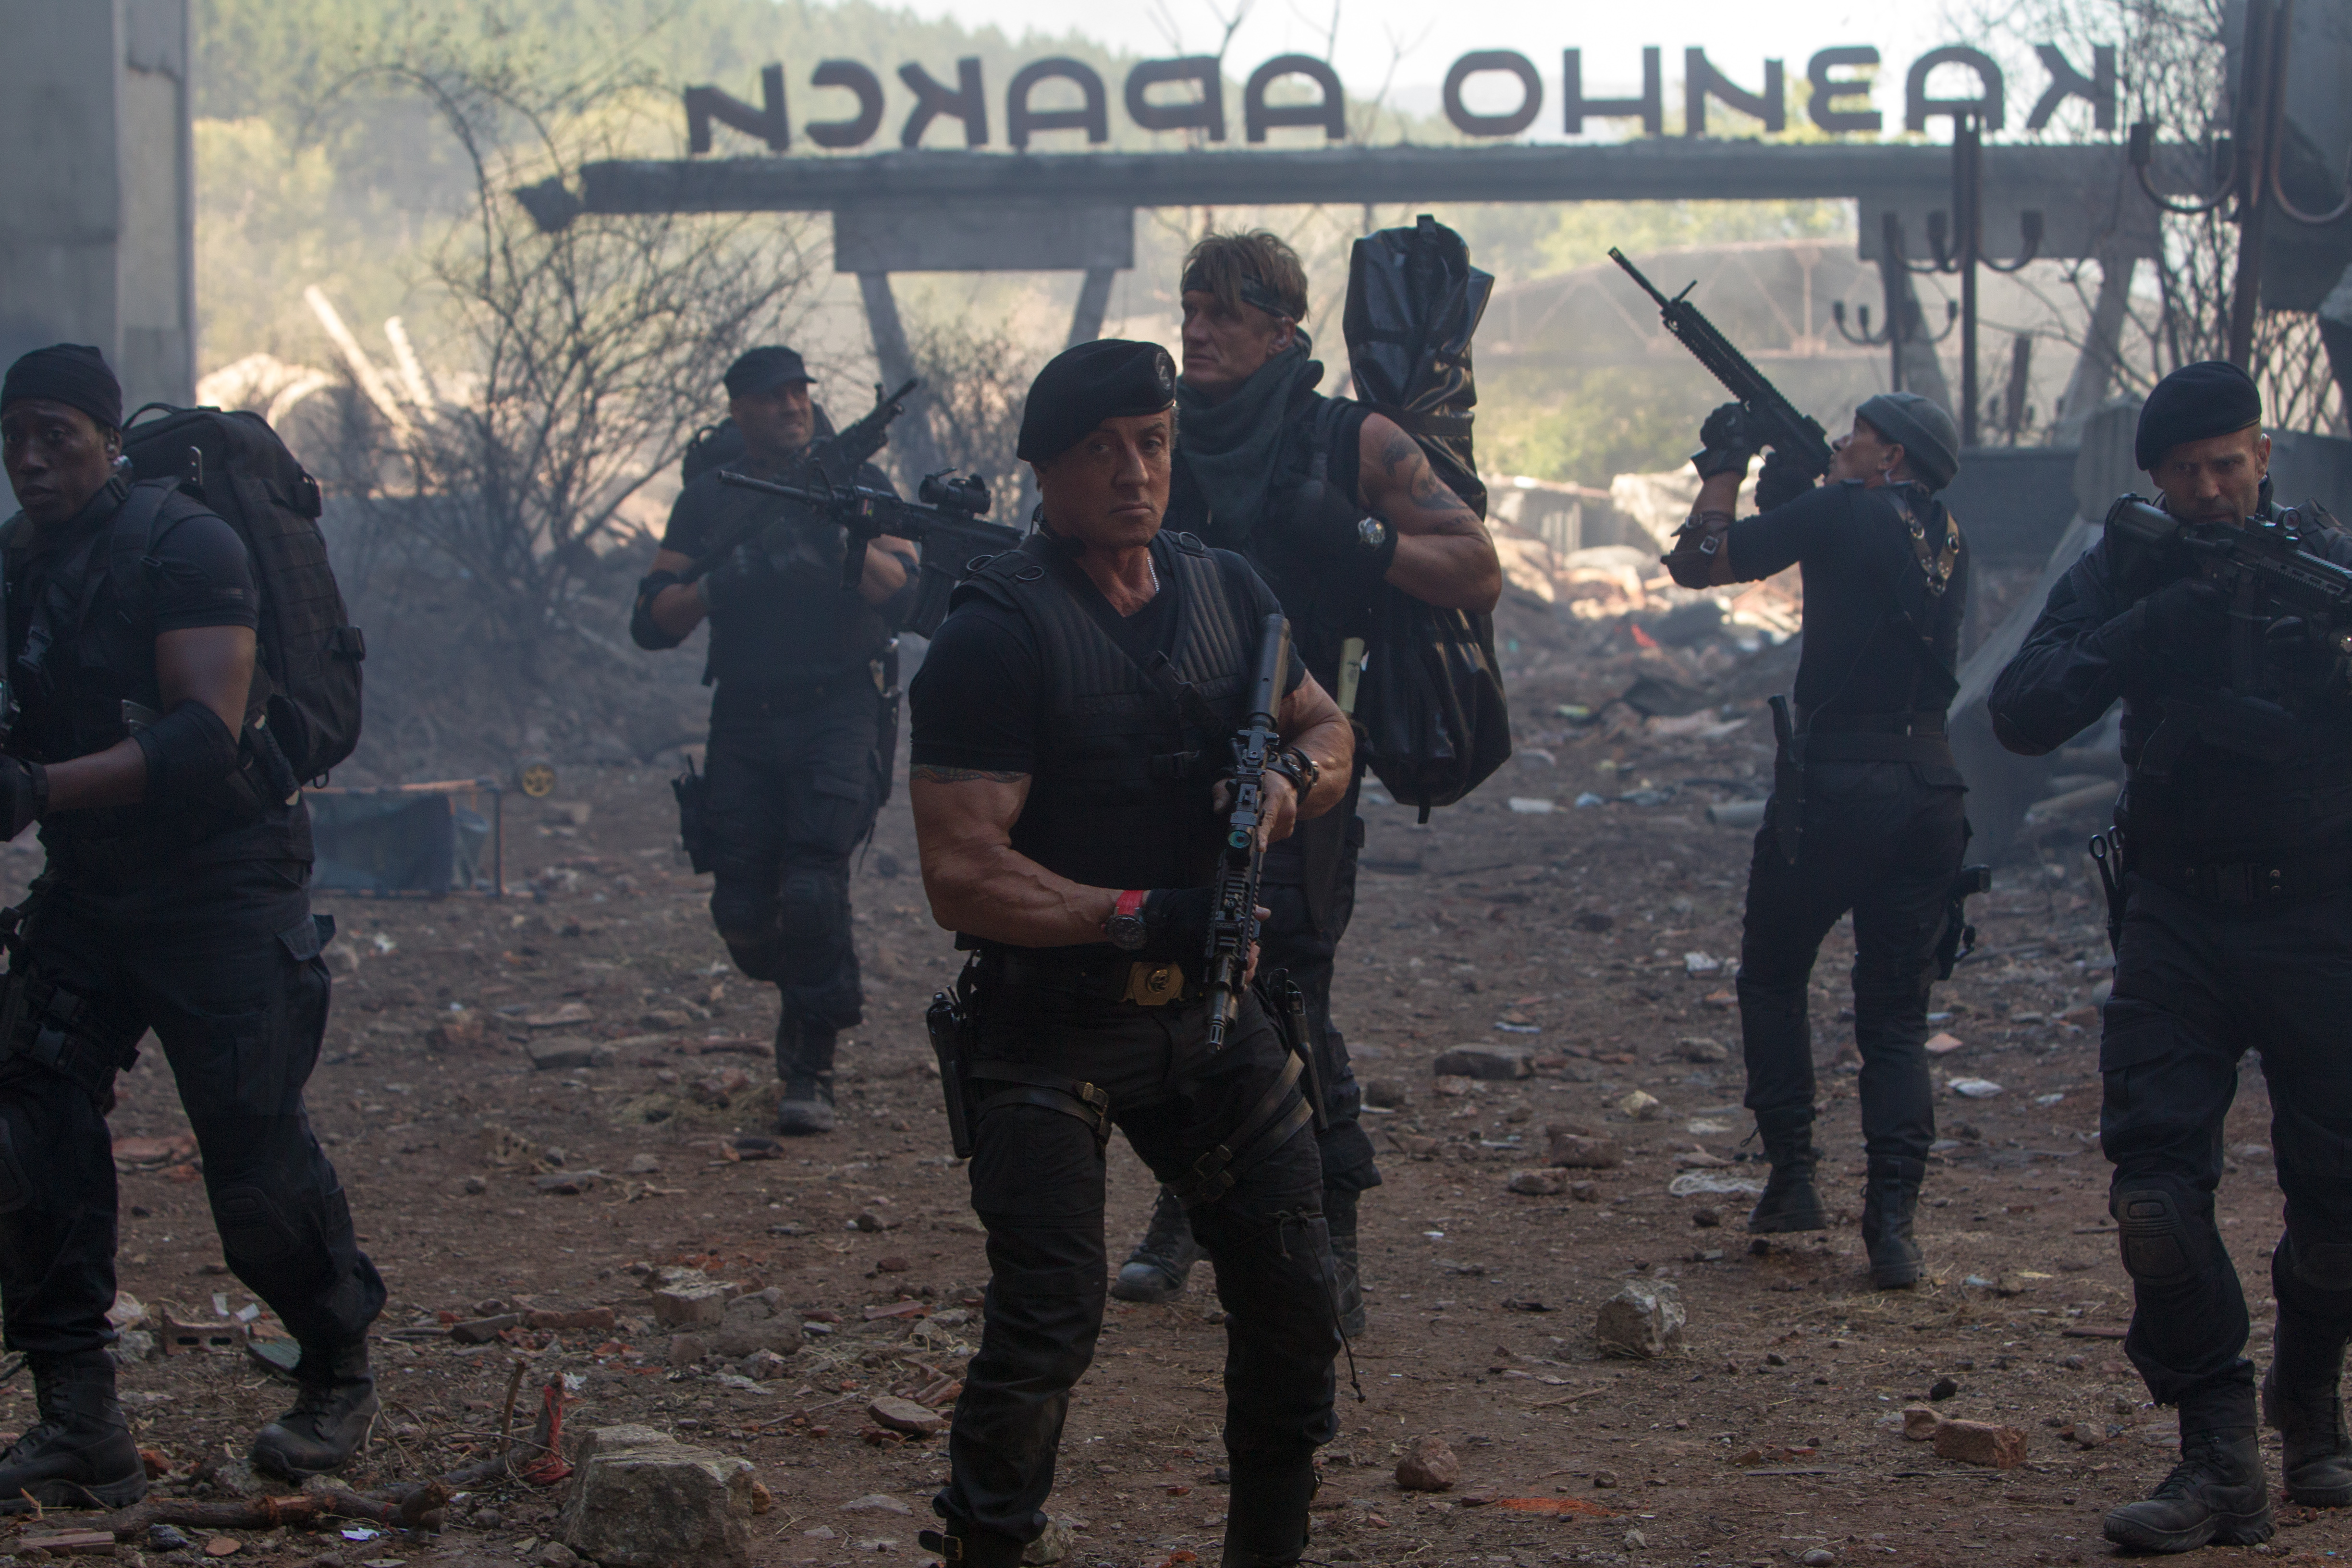 movie, the expendables 3, antonio banderas, barney ross, doc (the expendables), dolph lundgren, galgo (the expendables), gunnar jensen, jason statham, lee christmas, randy couture, sylvester stallone, toll road, wesley snipes, the expendables